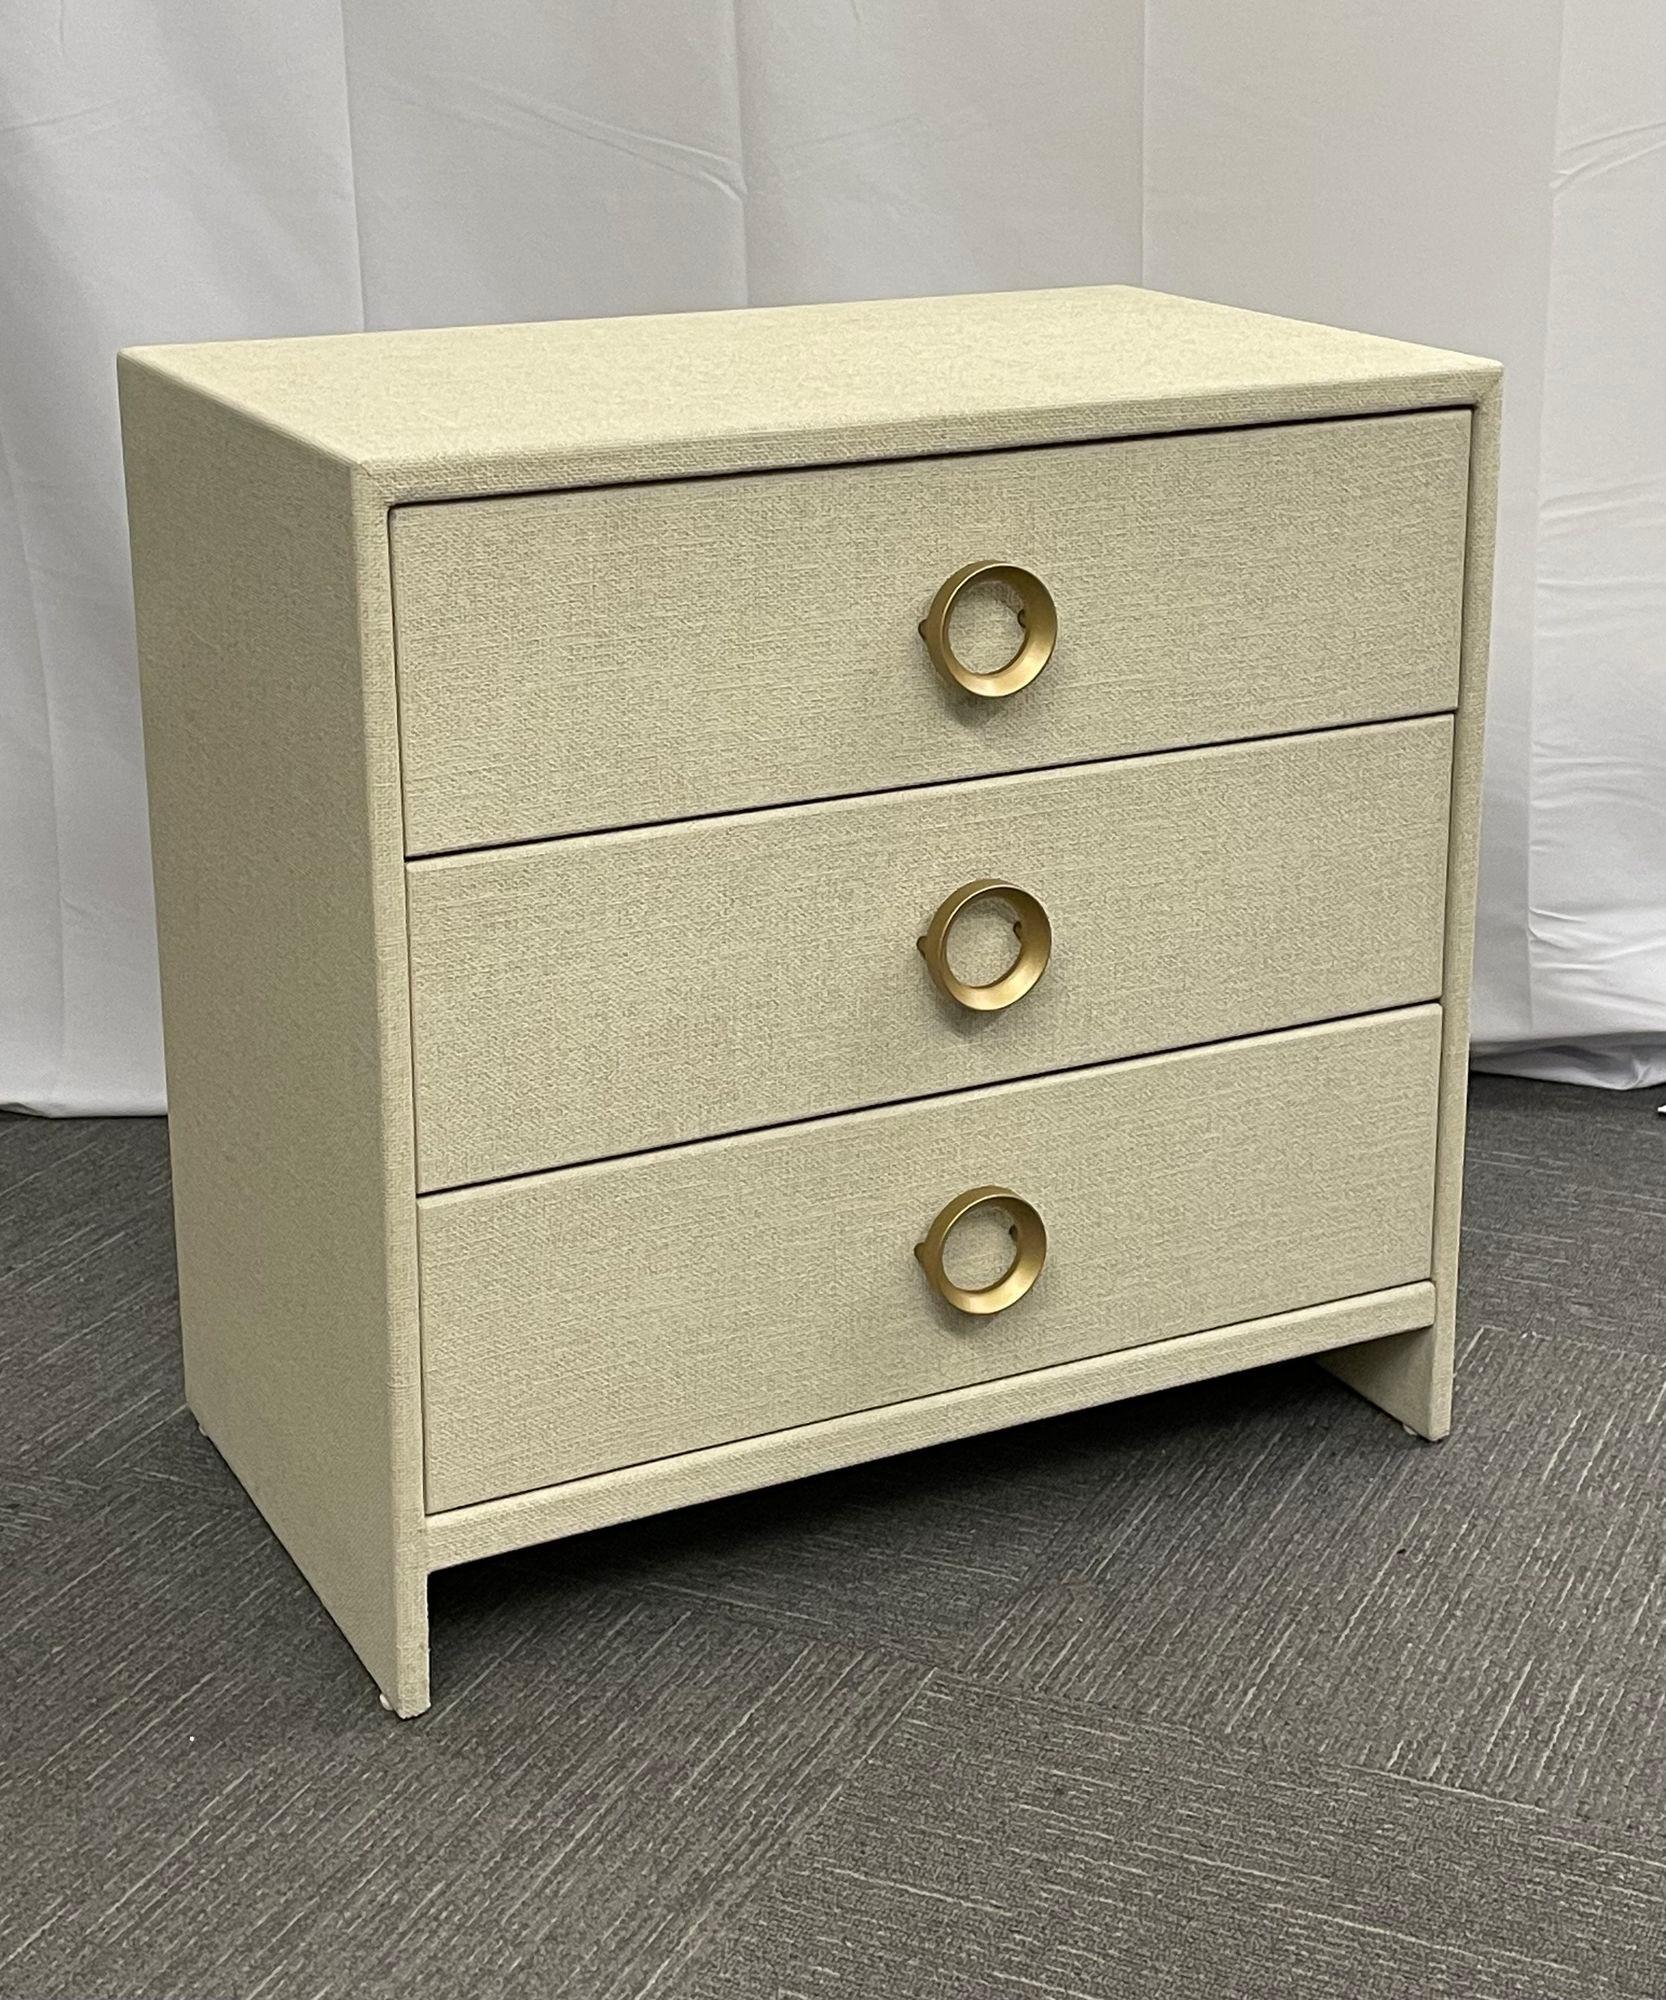 Pair Linen Wrapped Three Drawer Commodes / Chests, Nightstands, Modern, American In Good Condition For Sale In Stamford, CT